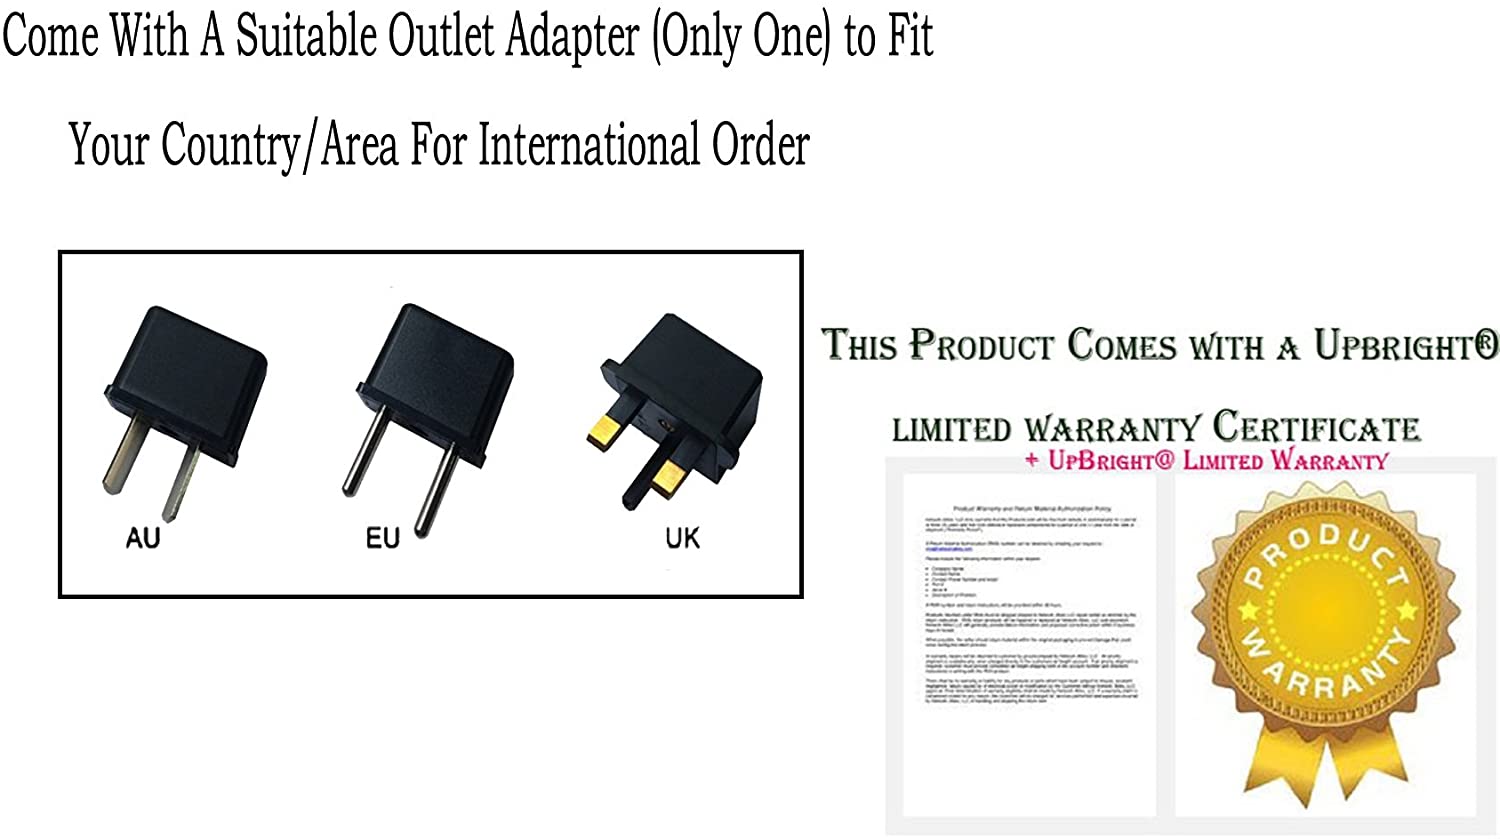 UPBRIGHT NEW Global AC / DC Adapter For AXIS T8006 PS12 Power Supply Fits AXIS Q19 Series Network Camera 5030-062 5030-063 5030-064 5030-065 5030-066 5030-067 5030-068 5030-069 5030-112 - image 4 of 5